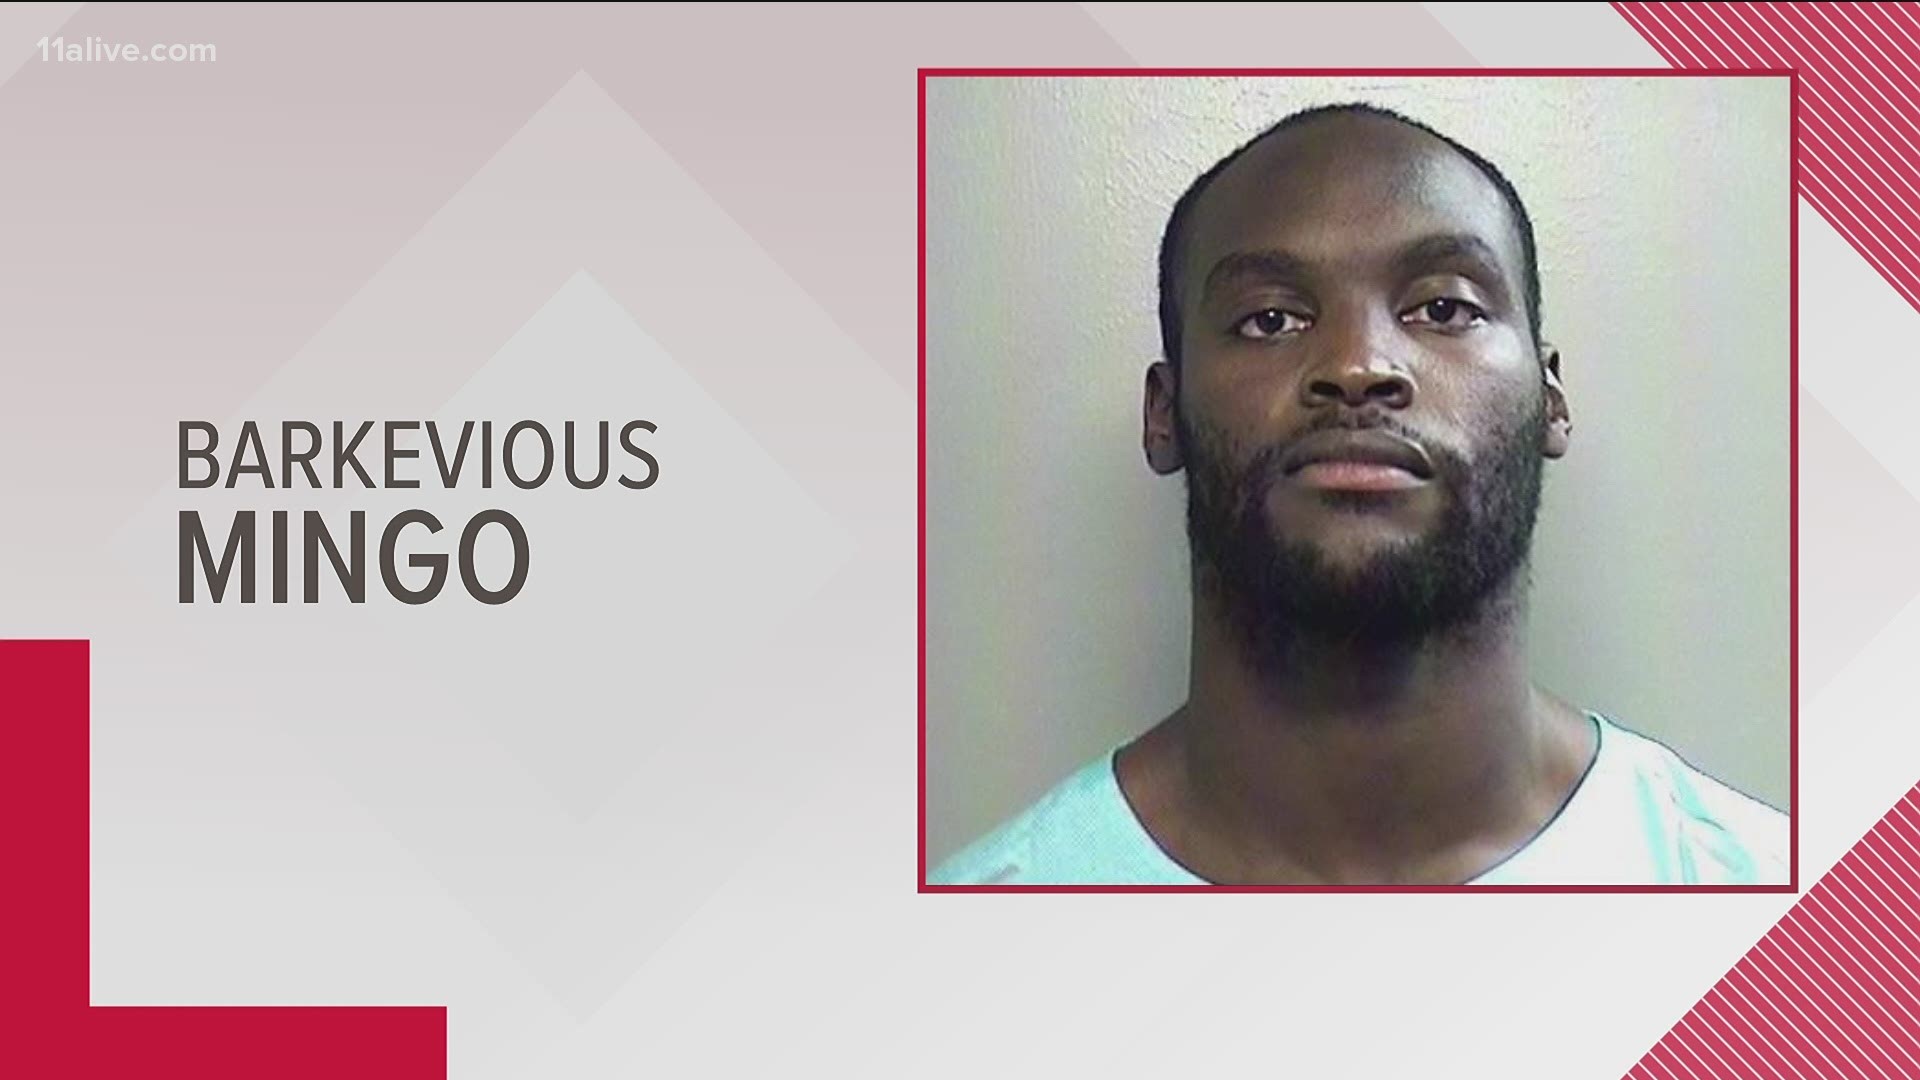 The Arlington Police Department arrested Barkevious Mingo on one count of indecency with a child - sexual contact.